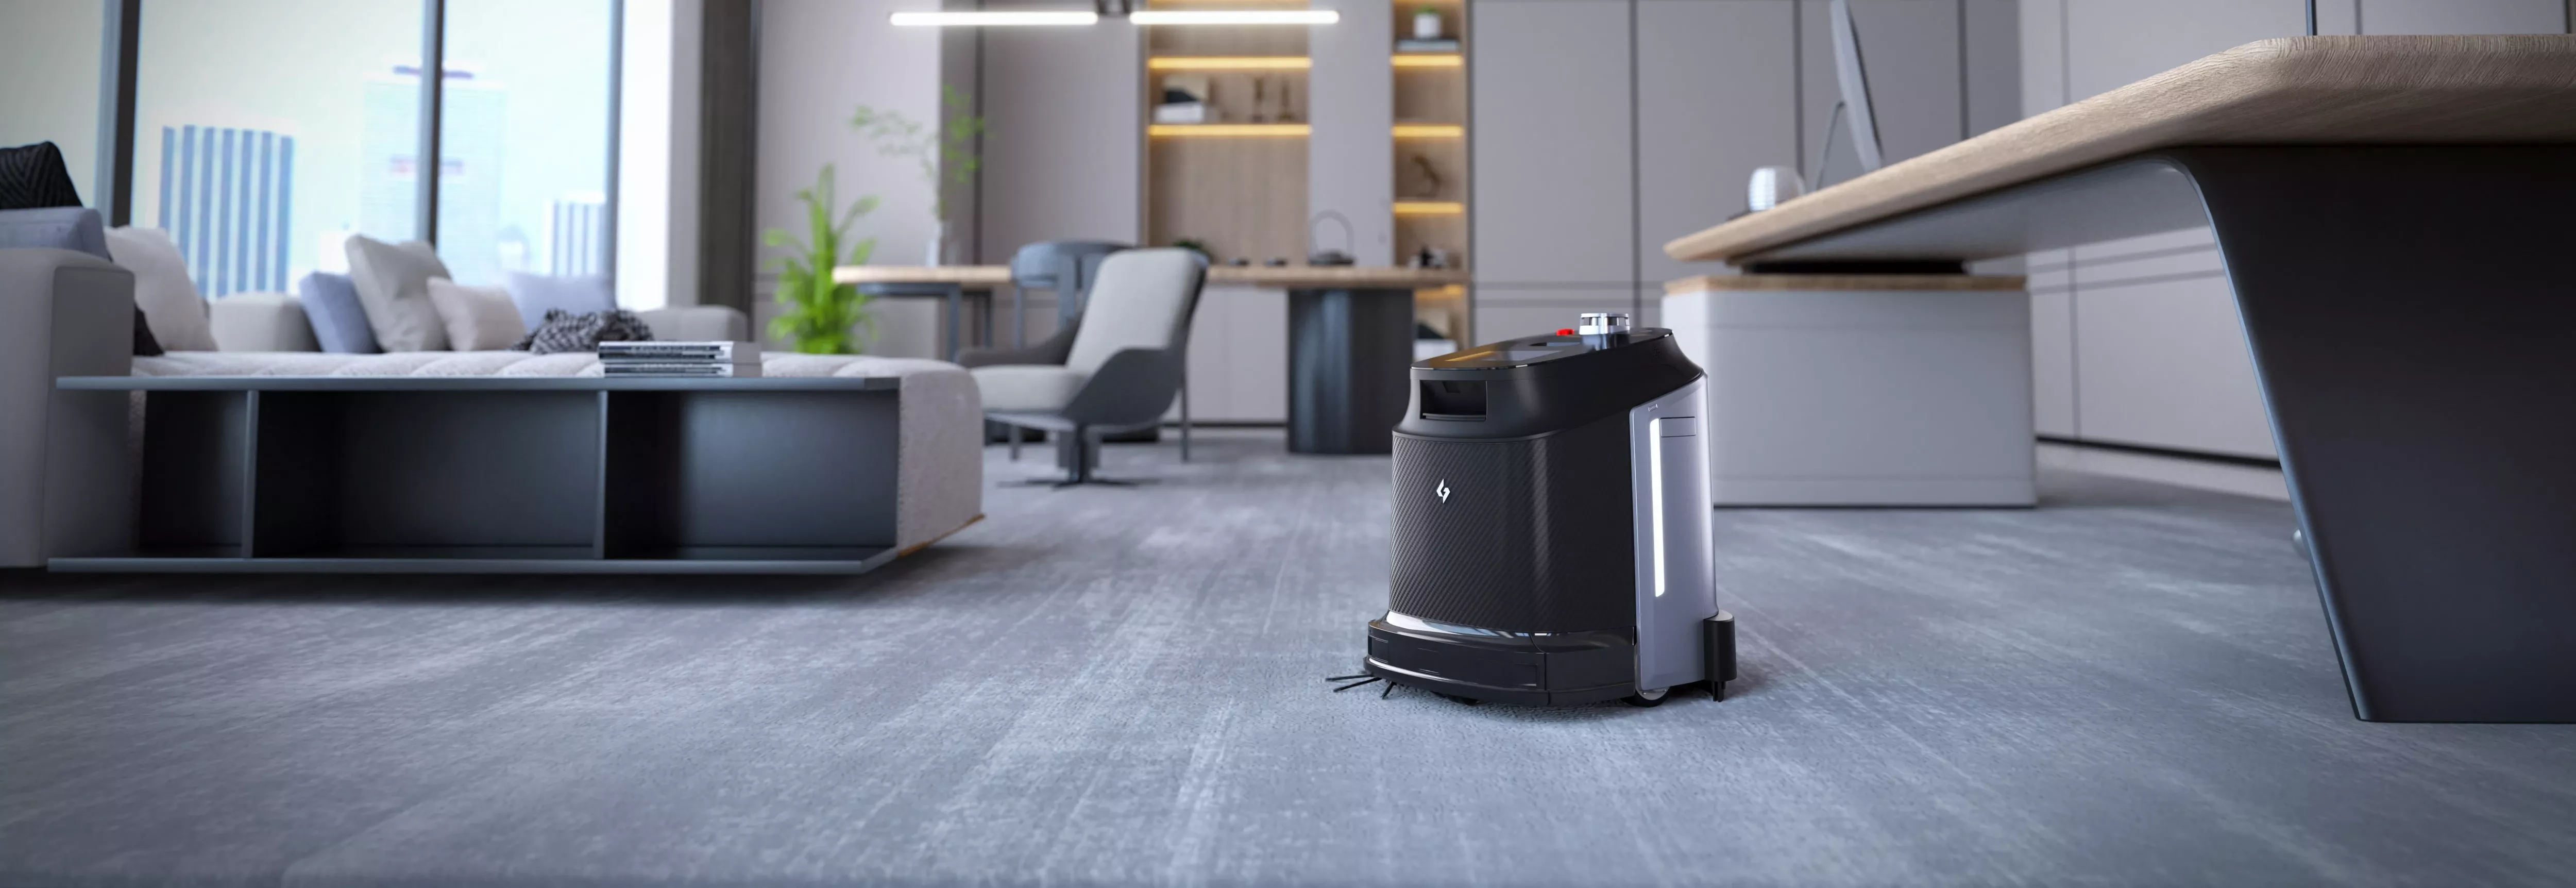 Versatile cleaning solution for offices